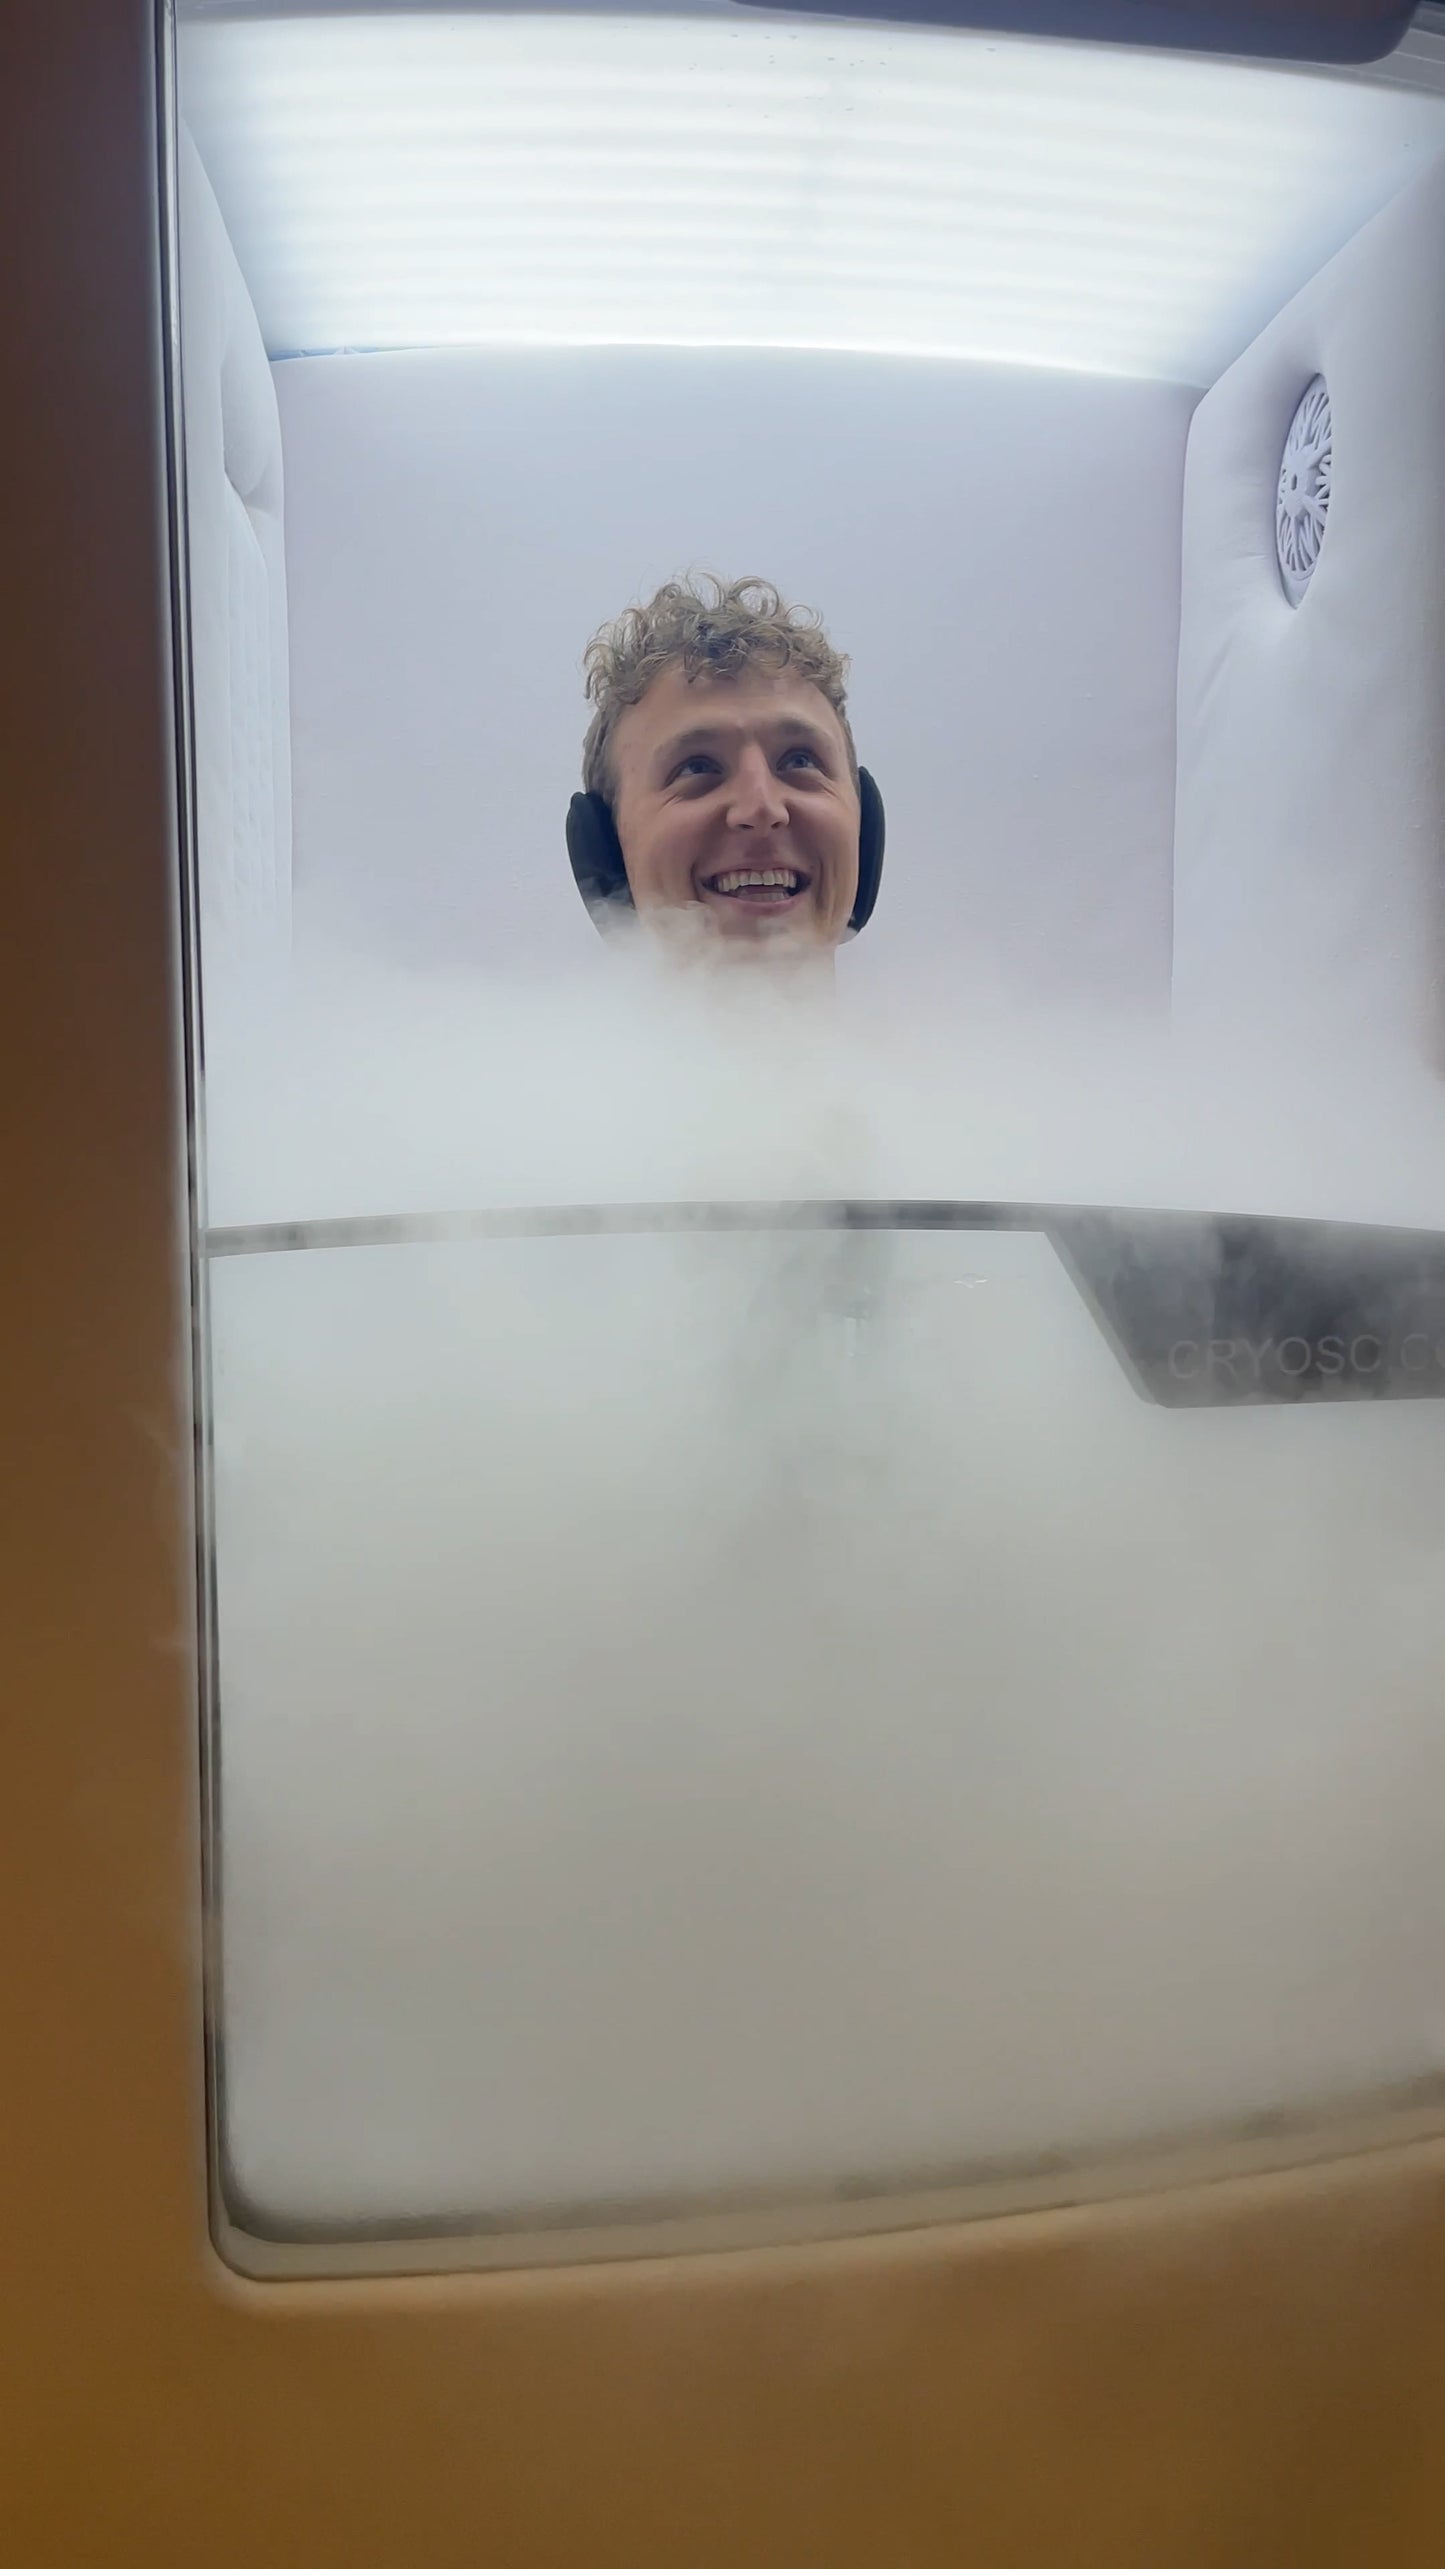 Cryotherapy Session at Restore Hyper Wellness